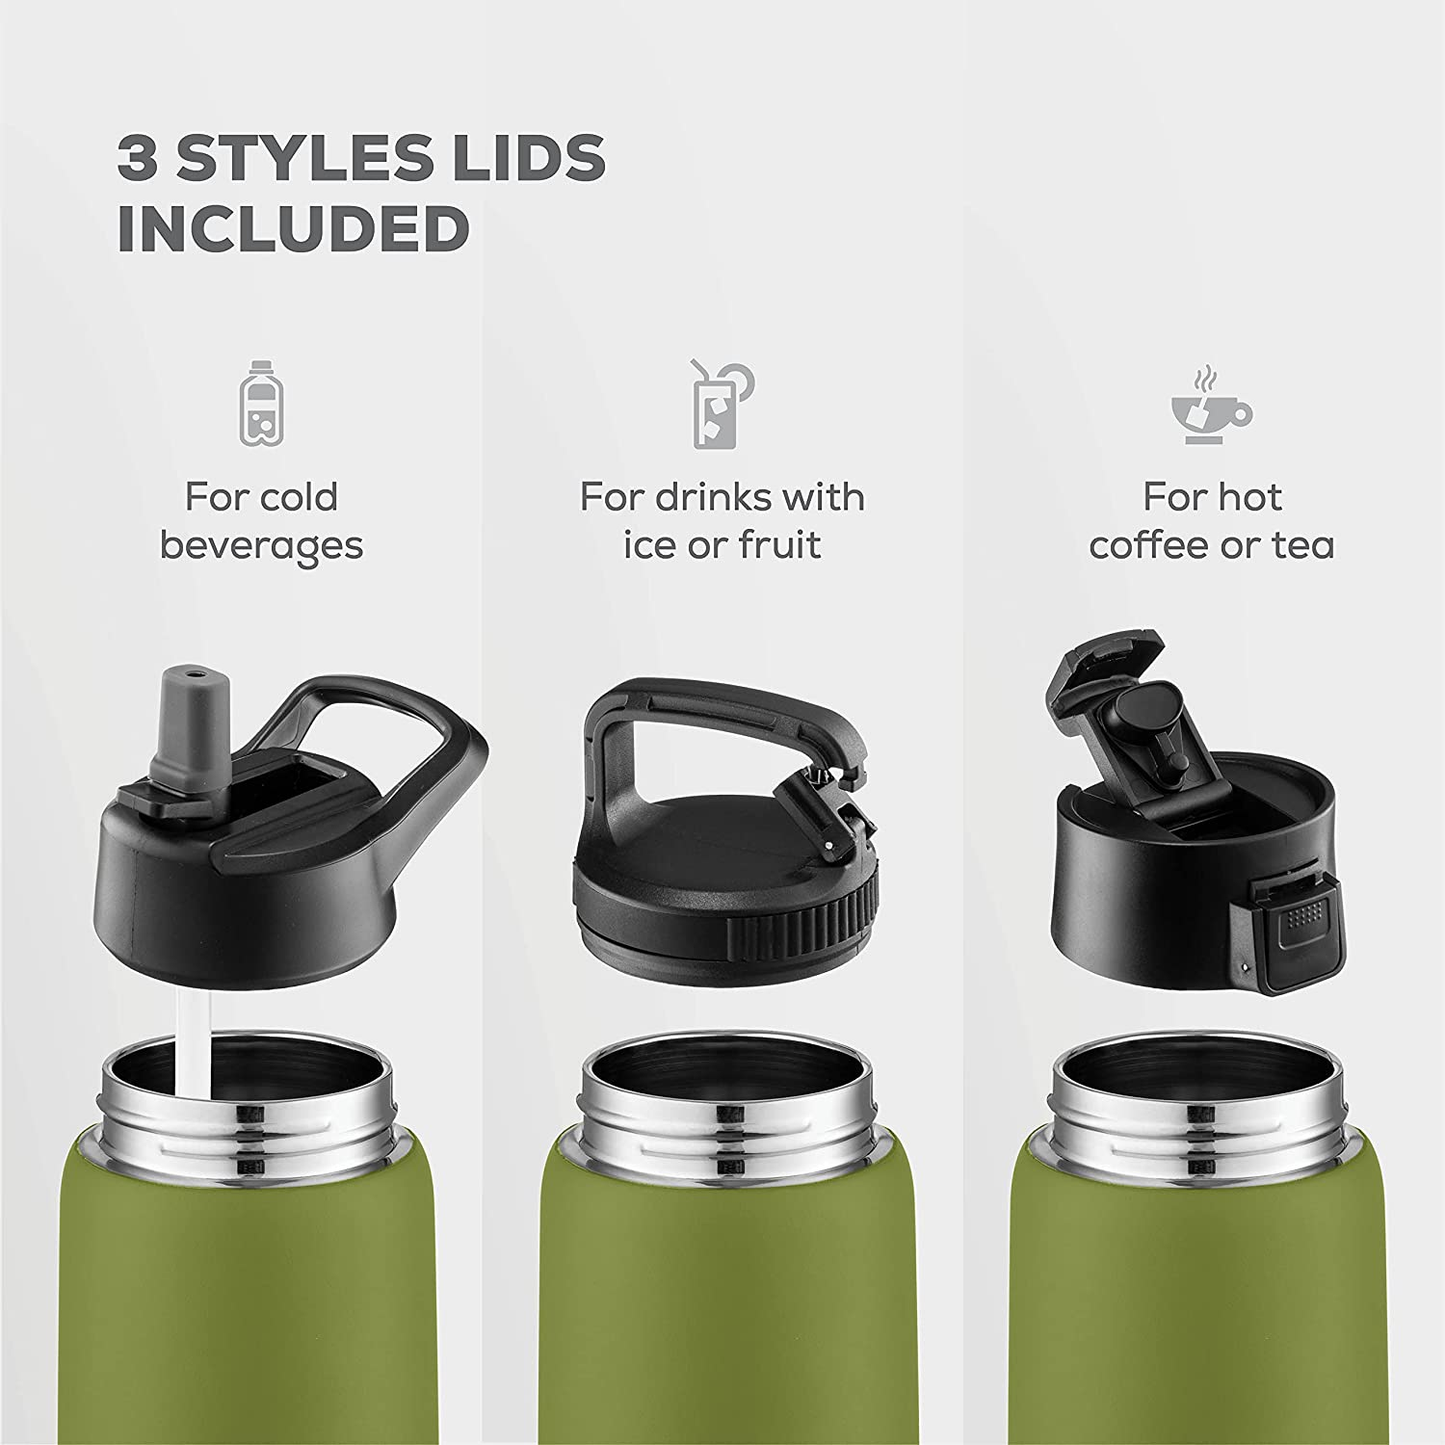 Triple-Insulated Stainless Steel Water Bottle with Straw Lid - Flip-Top Lid - Wide-Mouth Cap (25 Oz) Insulated Water Bottles, Keeps Hot and Cold - Sports Canteen Water Bottle Great for Hiking & Biking